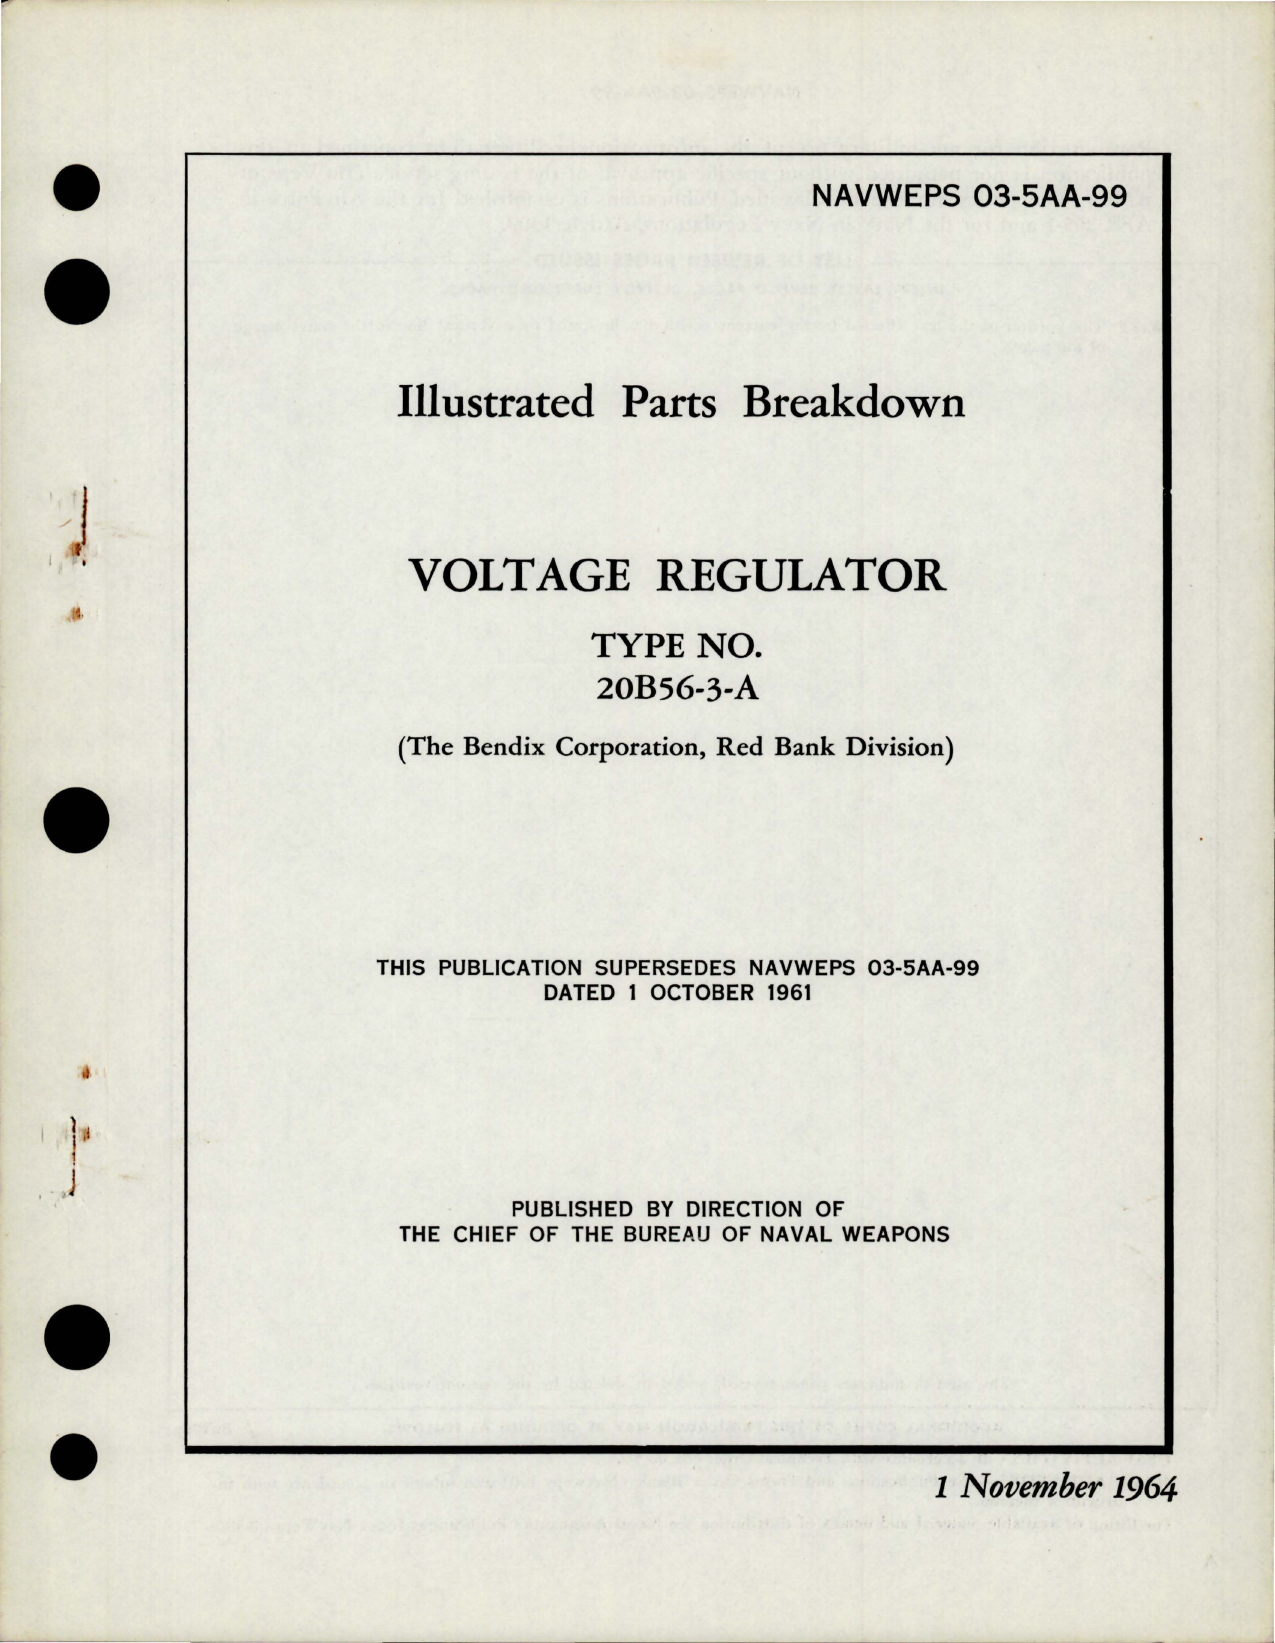 Sample page 1 from AirCorps Library document: Illustrated Parts Breakdown for Voltage Regulator - Type 20B56-3-A